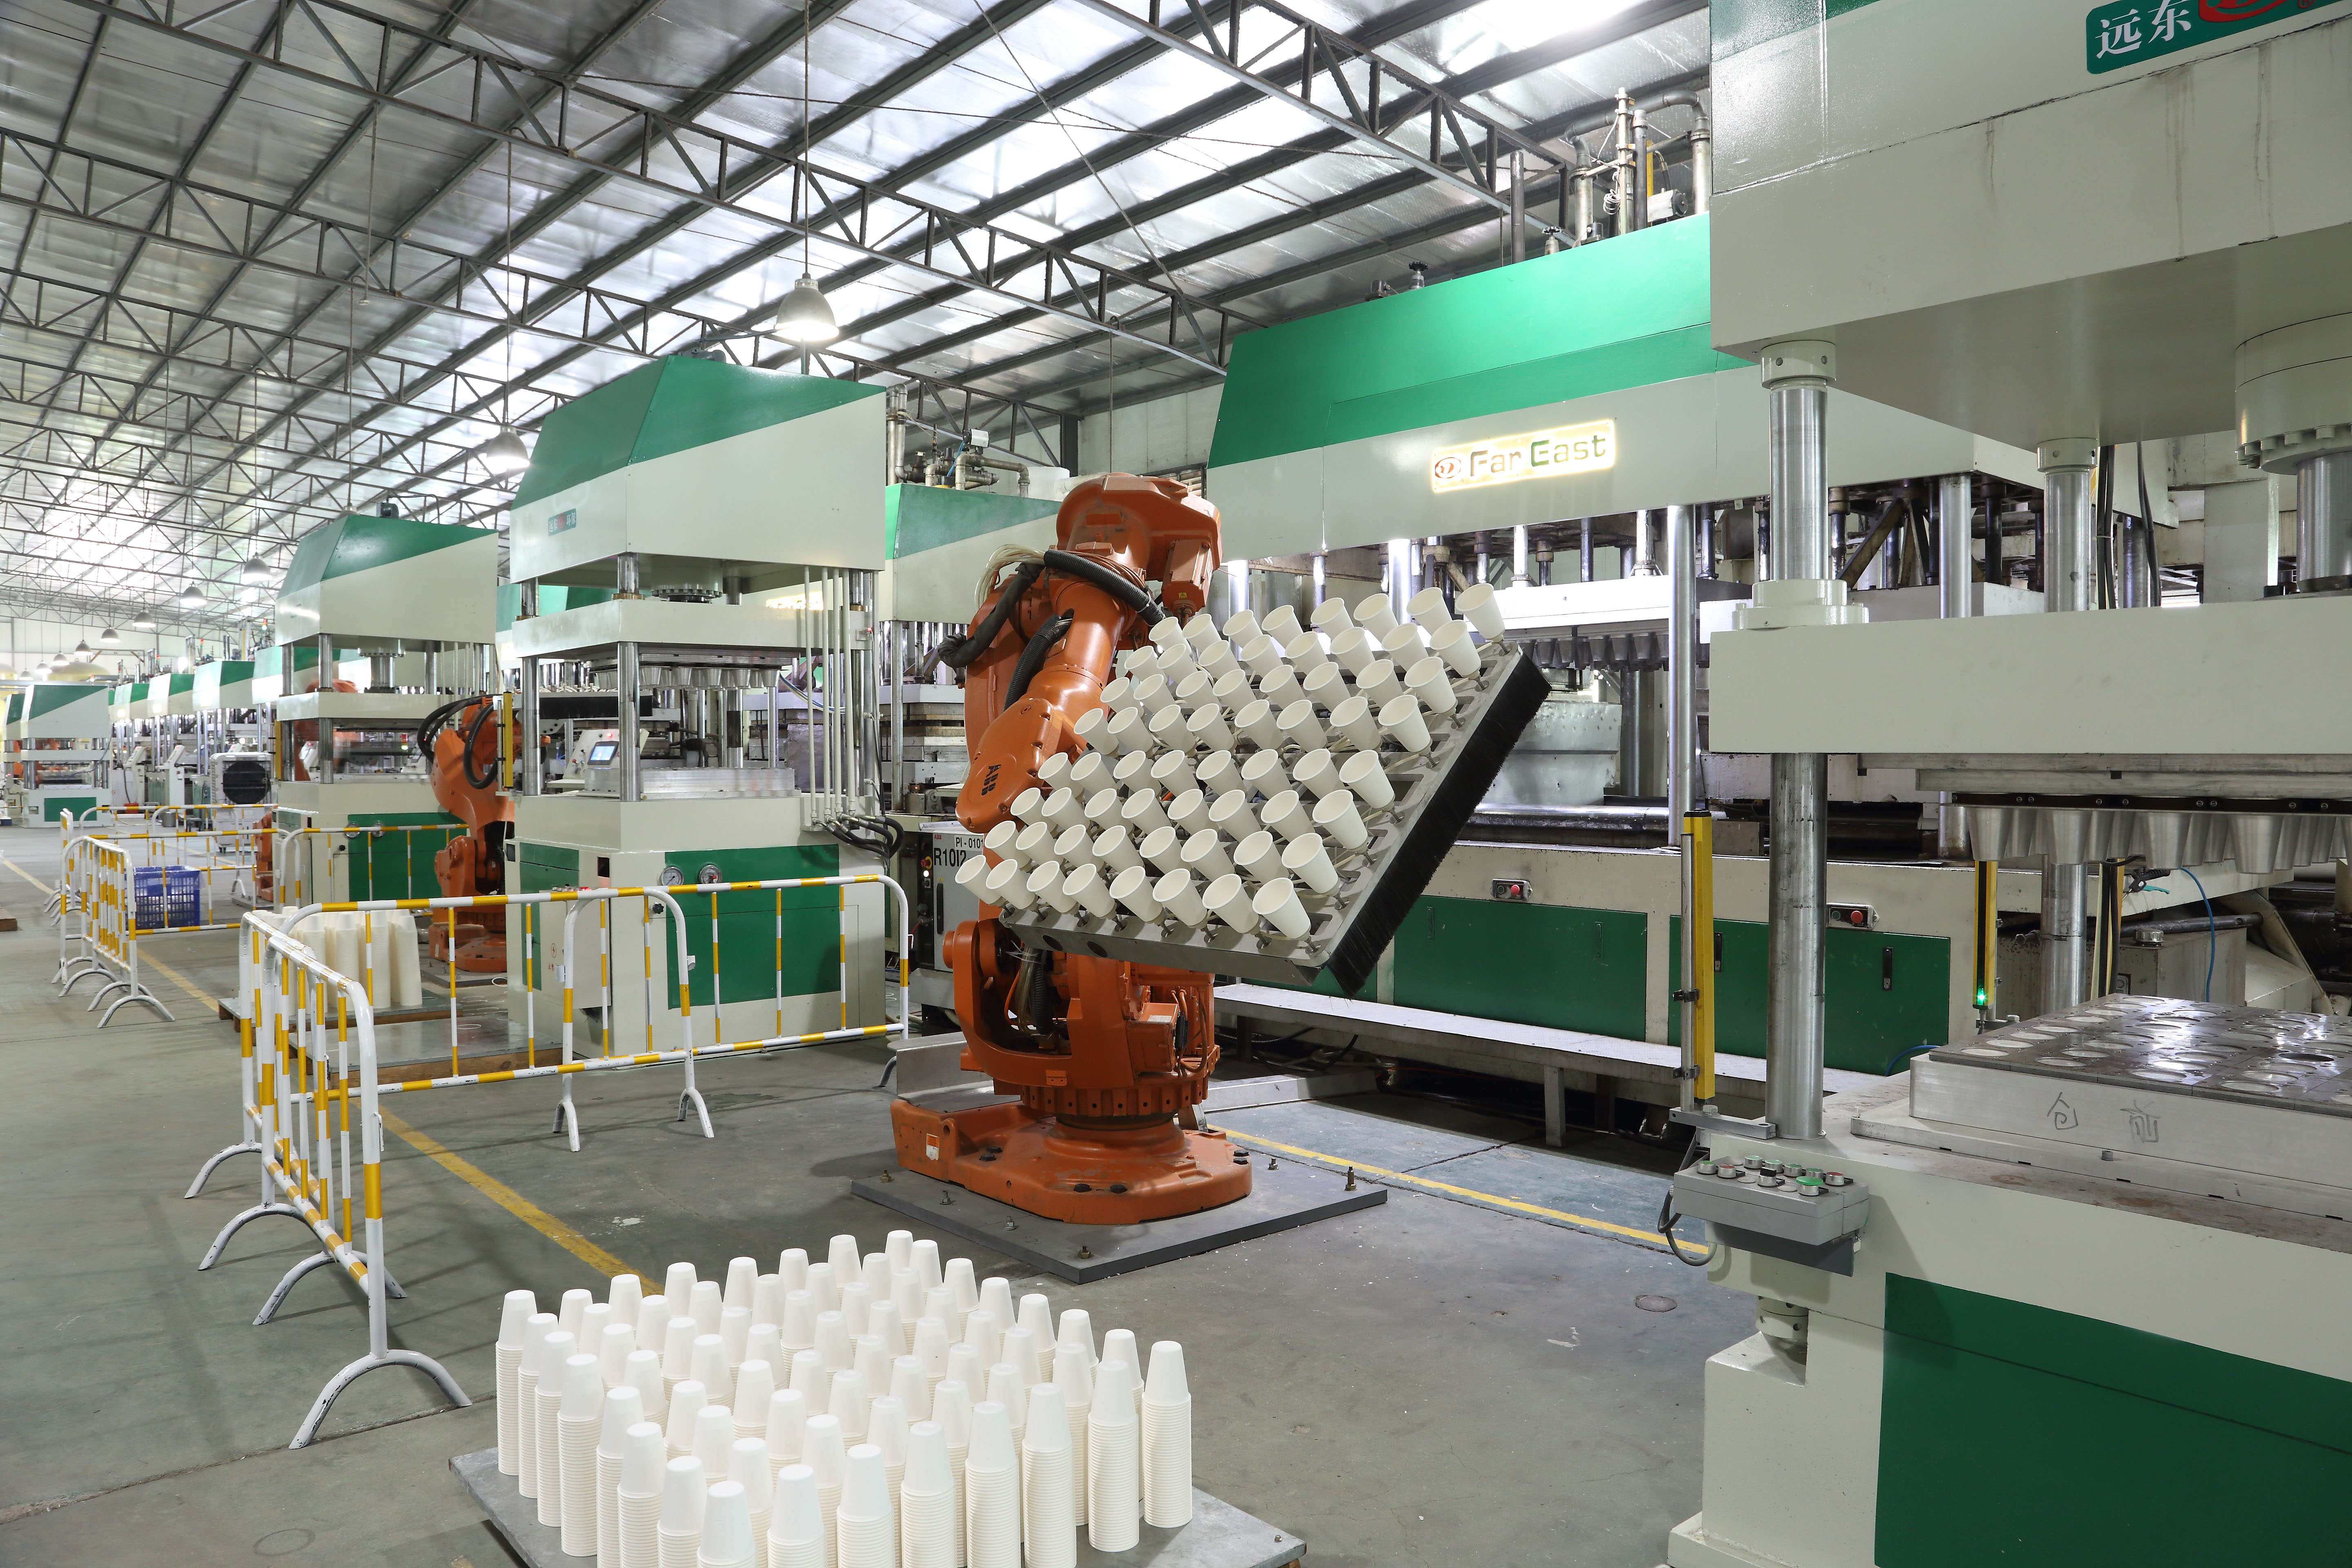 We Will Promote Semi Automatic Pulp Molding Tableware Machine With Intelligent Robot To Customers!